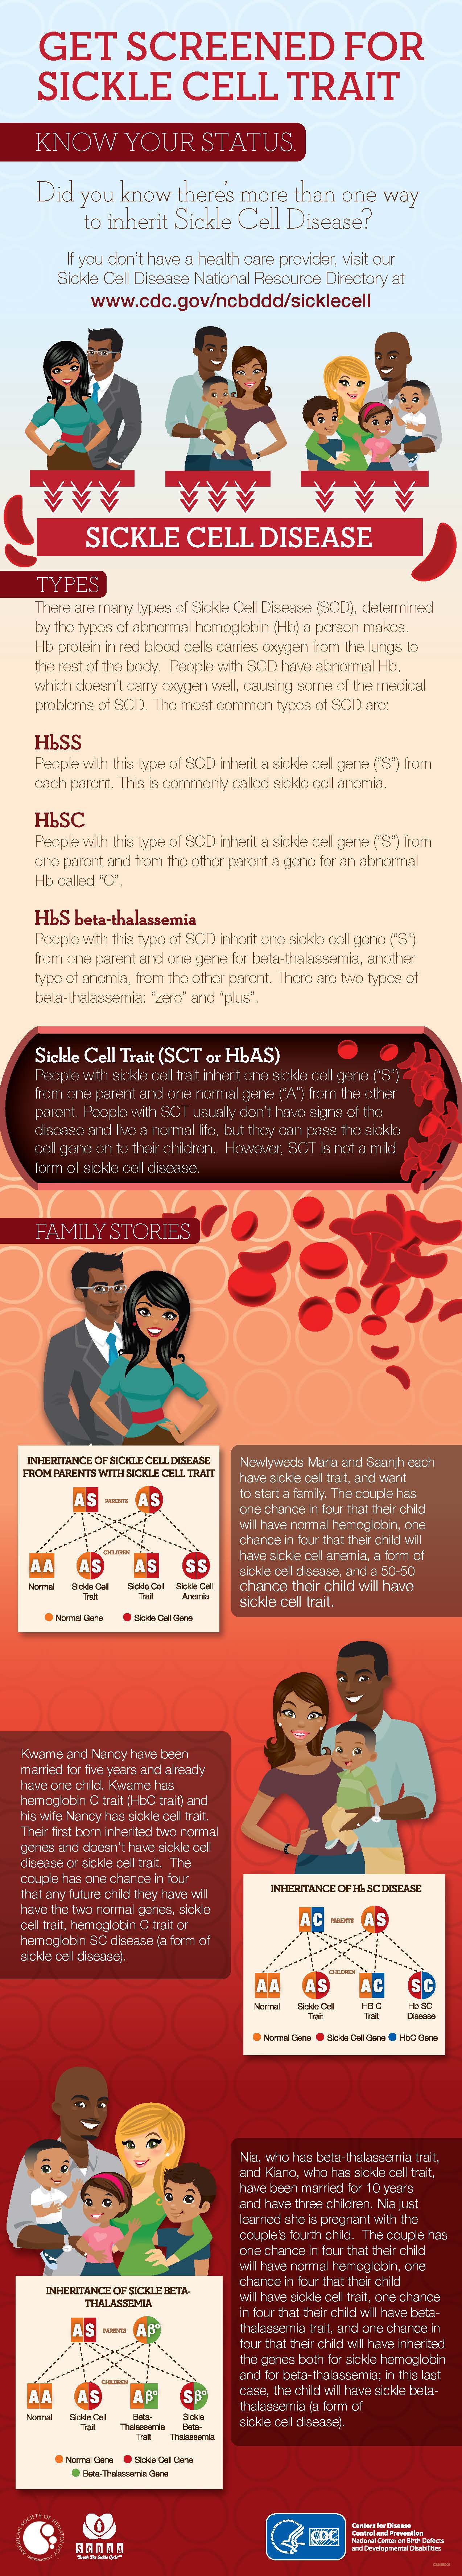 Sickle Cell graphic from Centers for Disease Control and Prevention